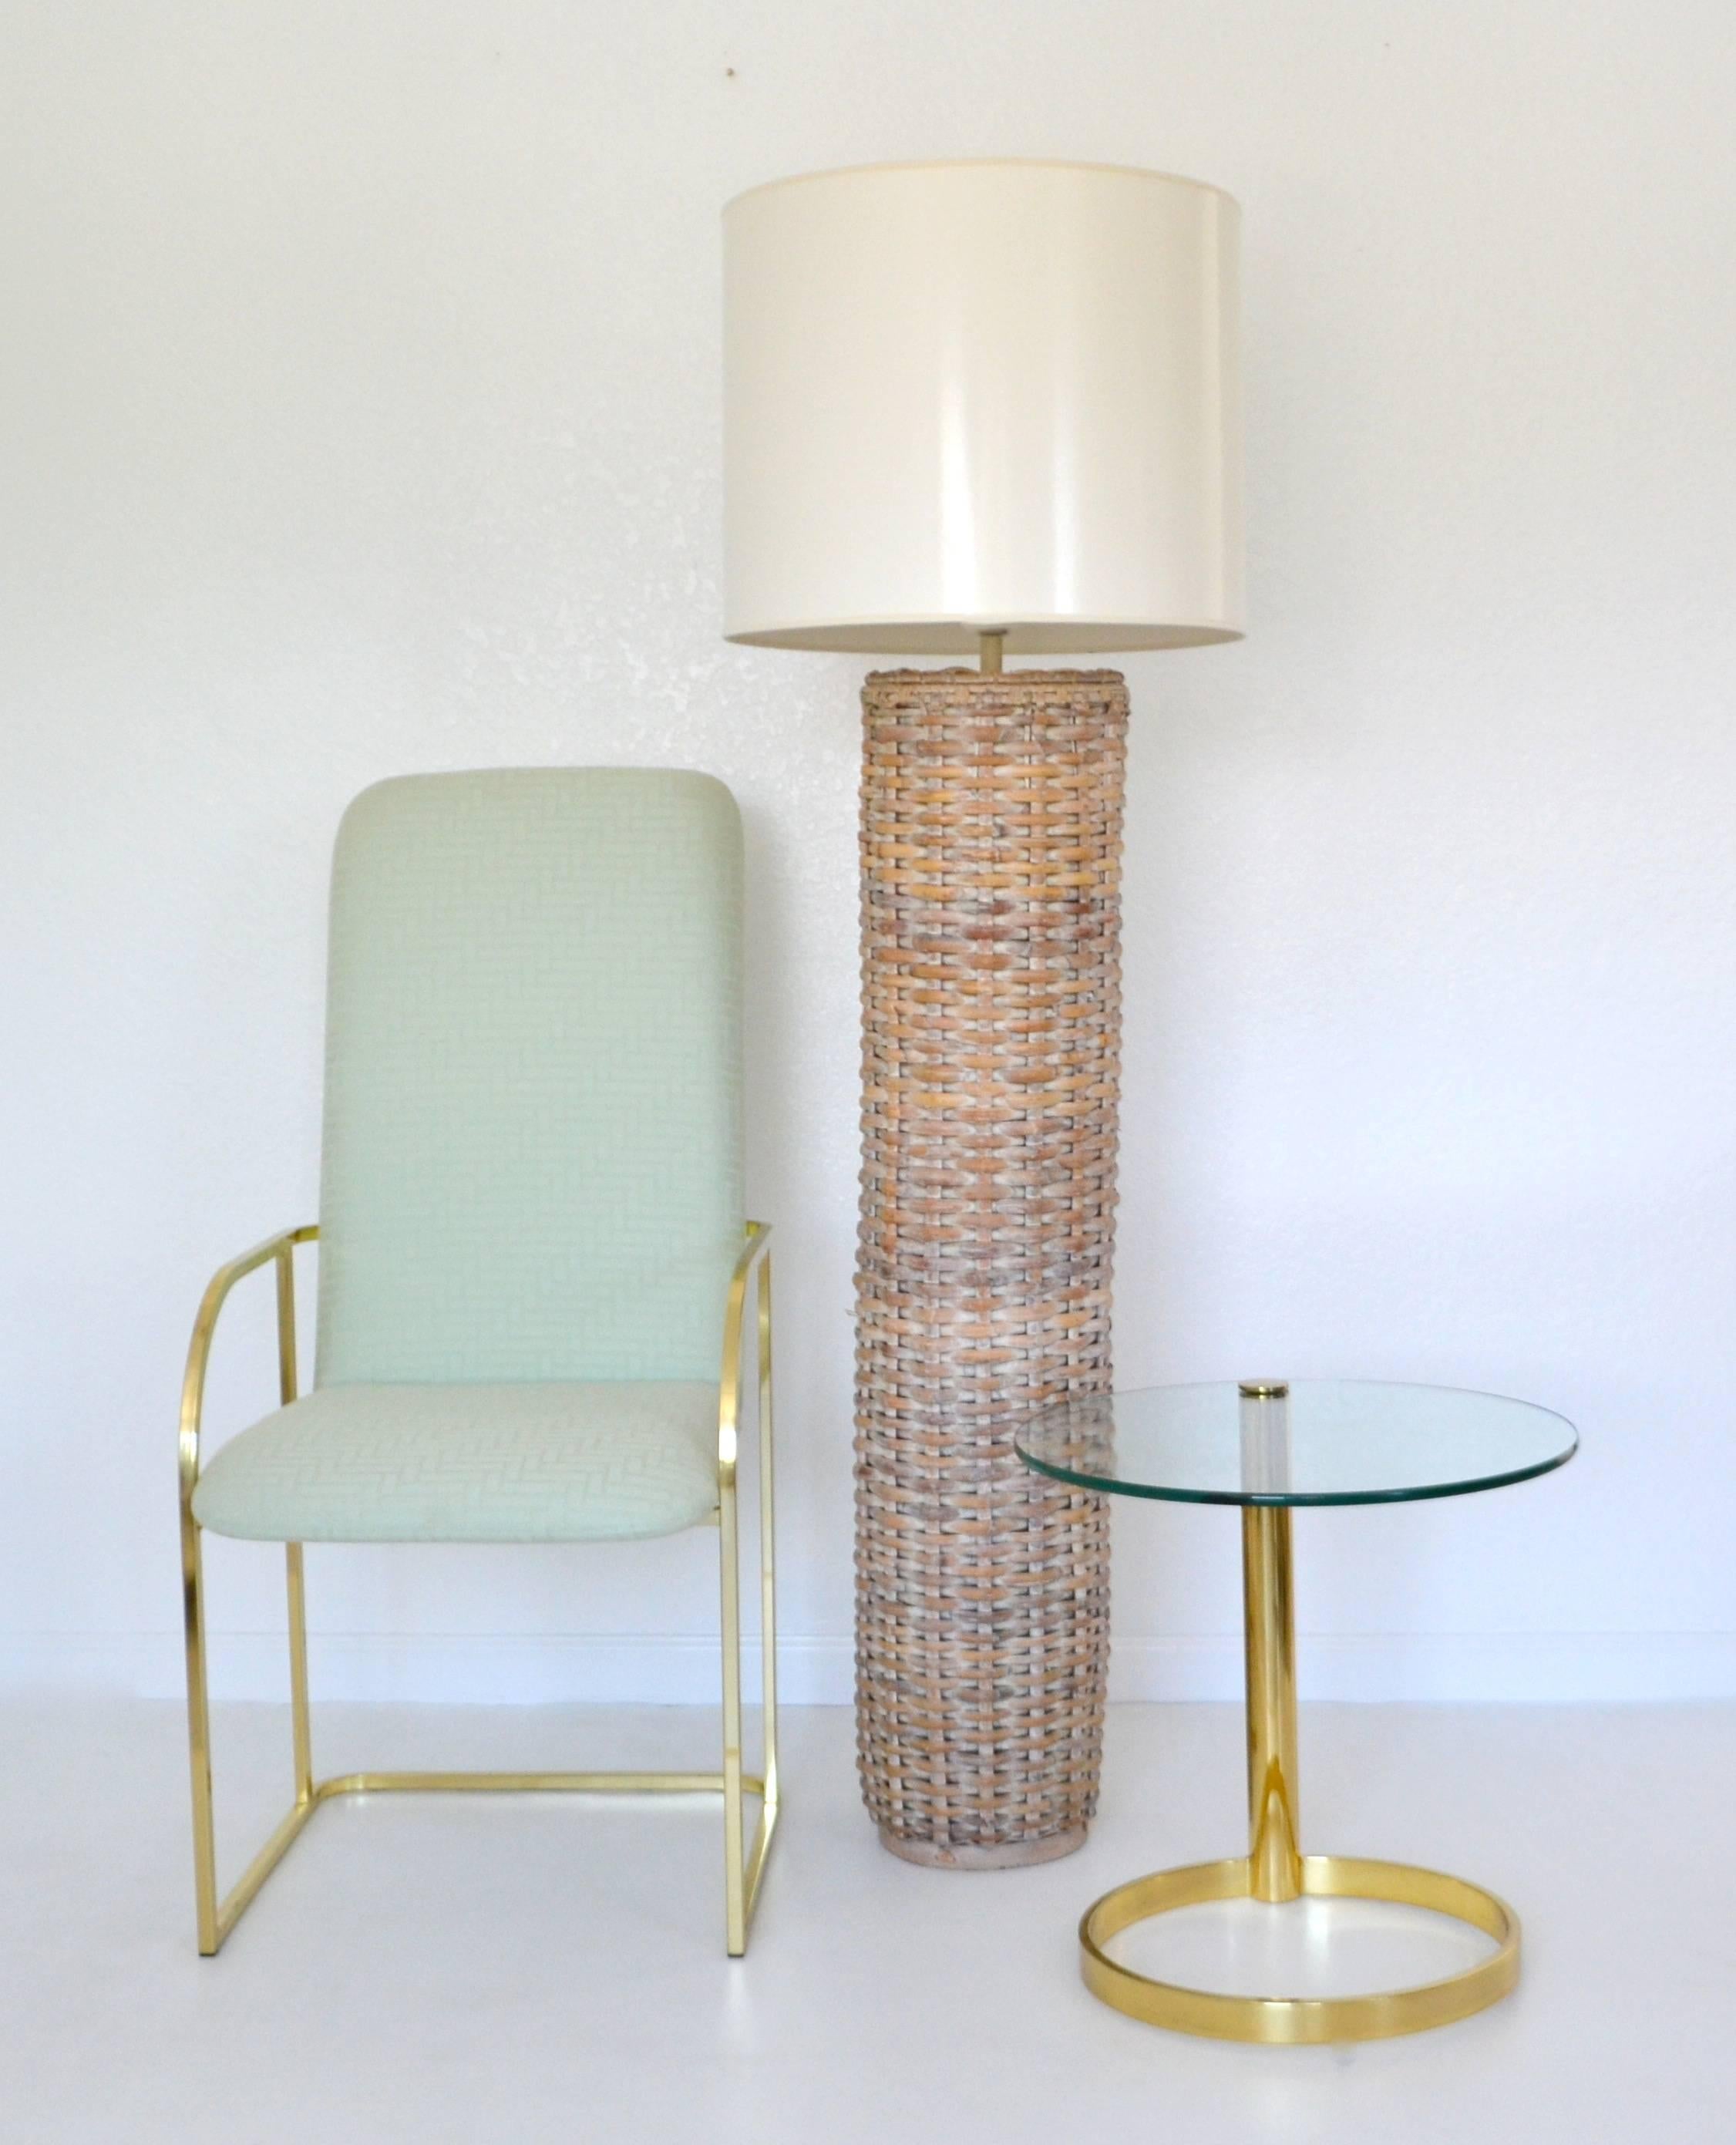 Striking midcentury woven rattan cylinder form floor lamp, circa 1960s. This sculptural artisan crafted standing lamp is wired with brass fittings. Shade not included. Measurements: 64